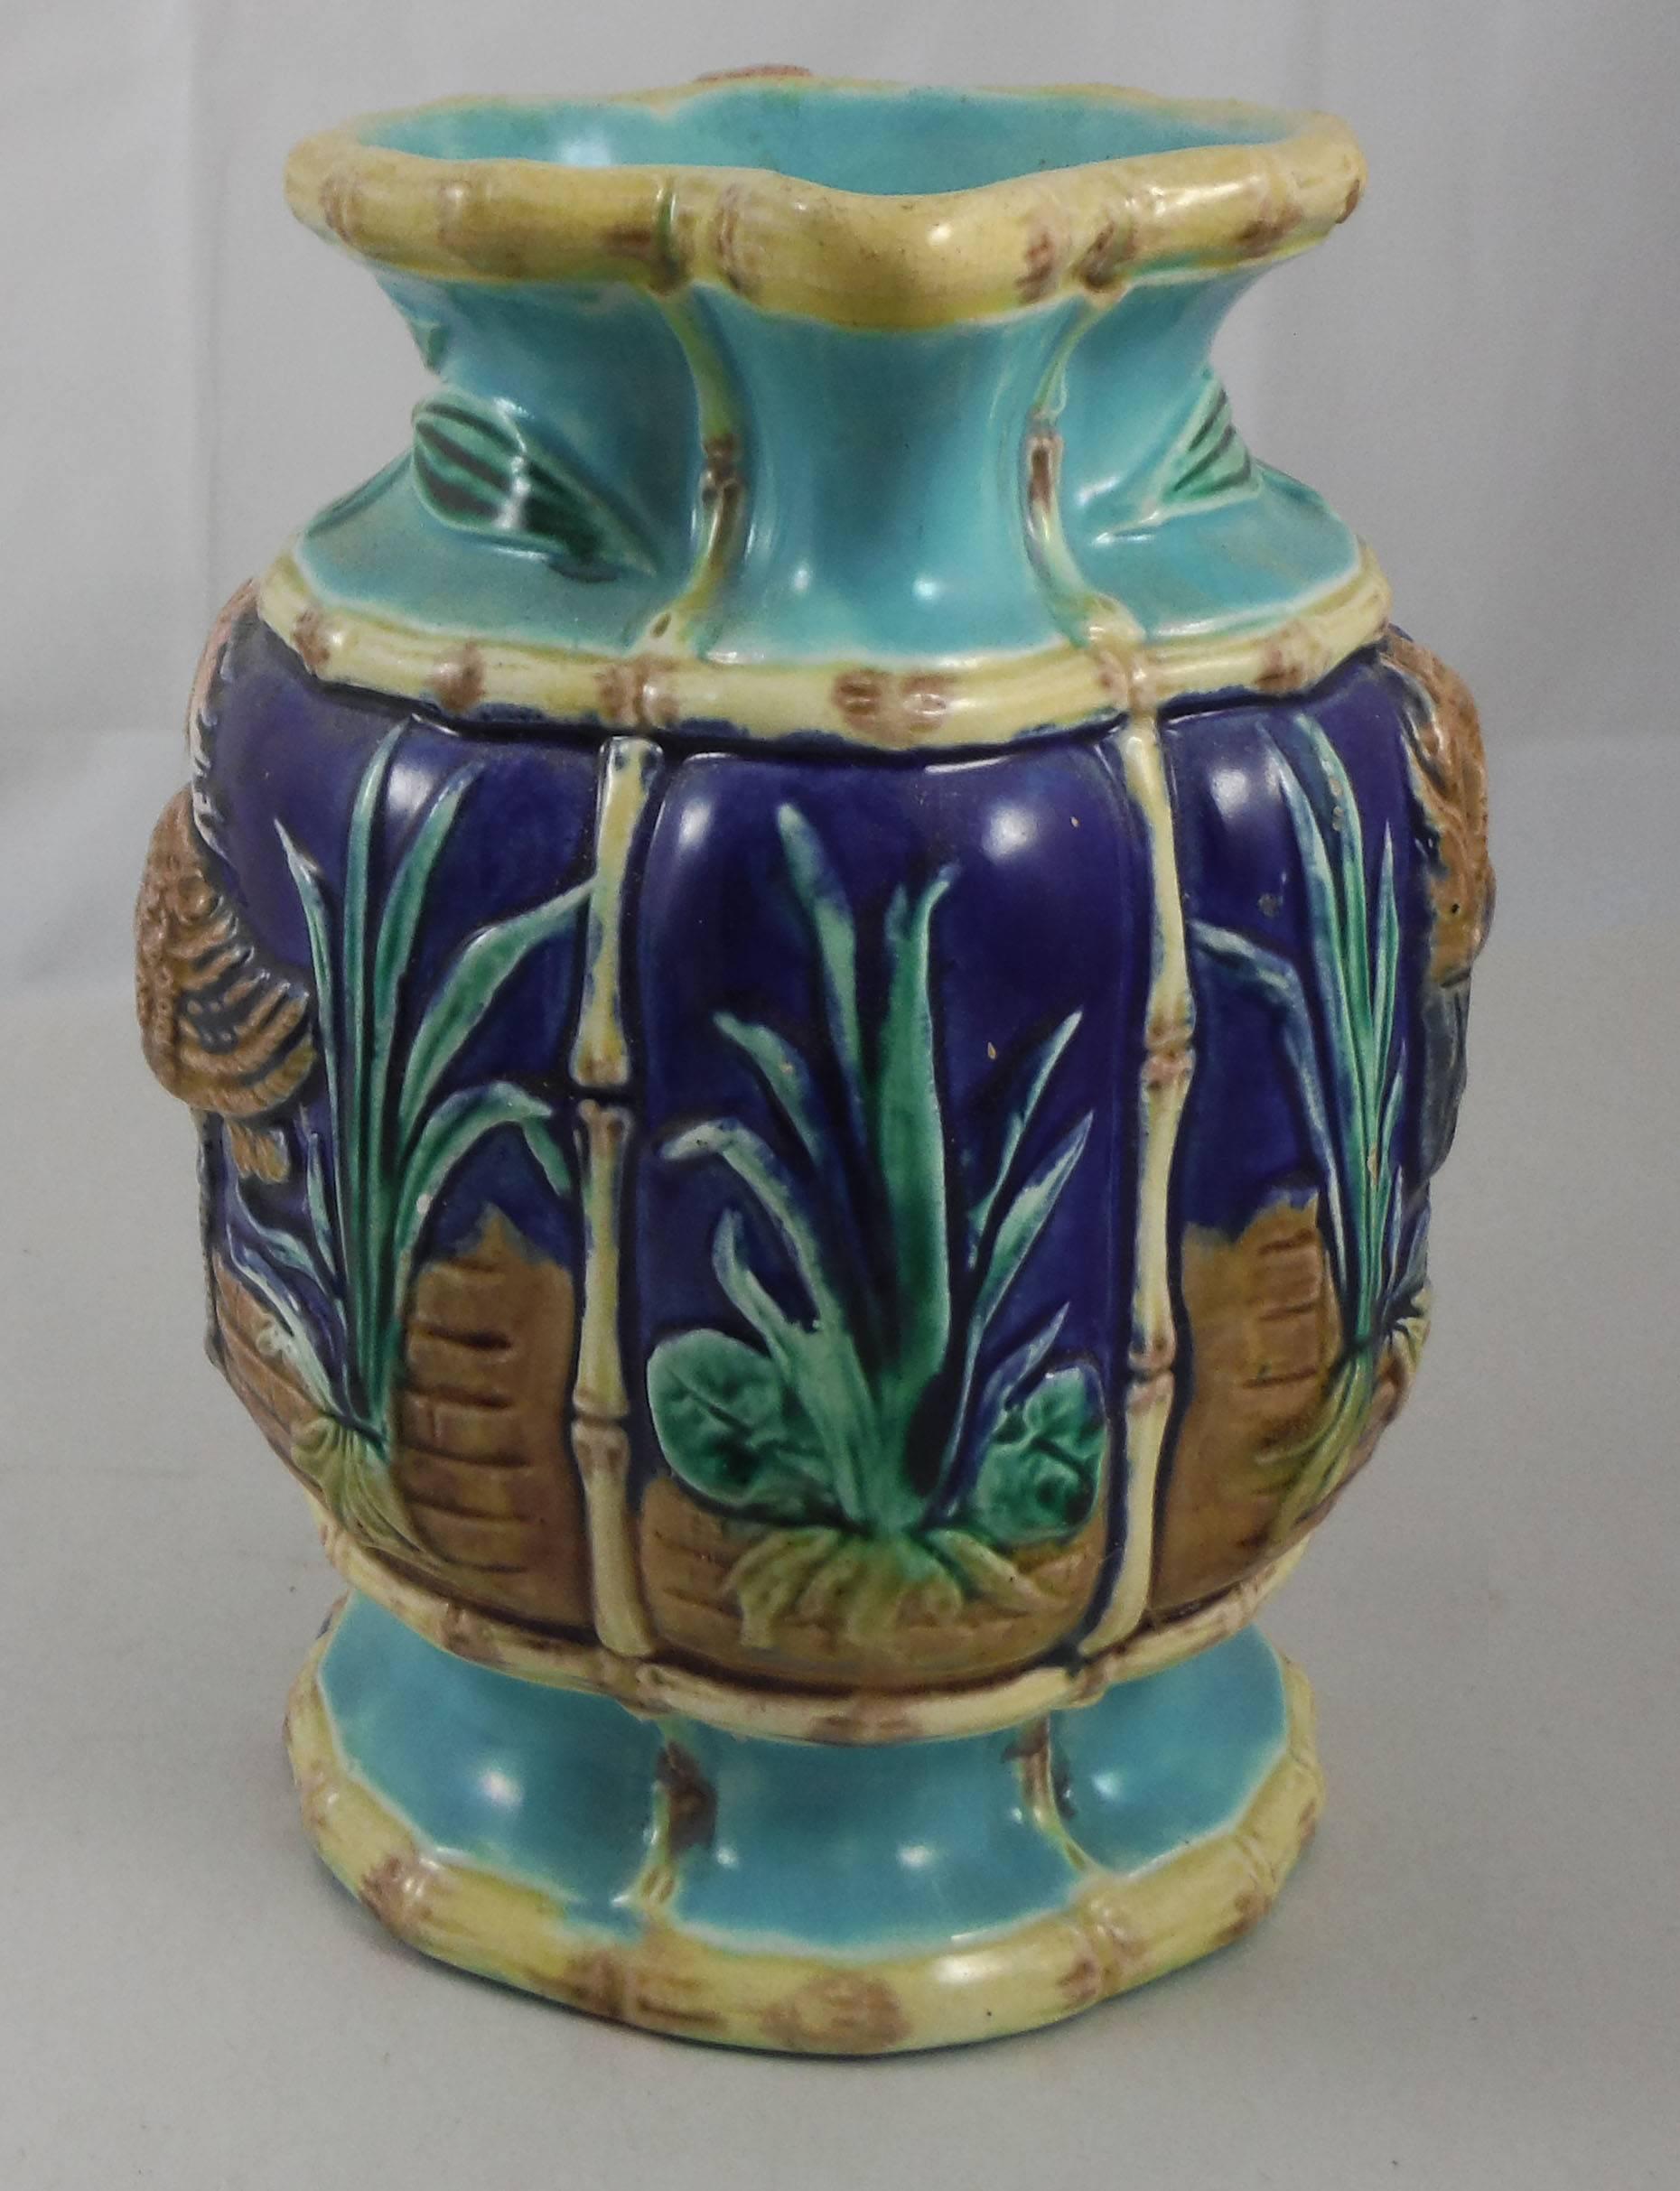 Aesthetic Movement 19th Century English Majolica Herons and Bamboo Pitcher Joseph Holdcroft